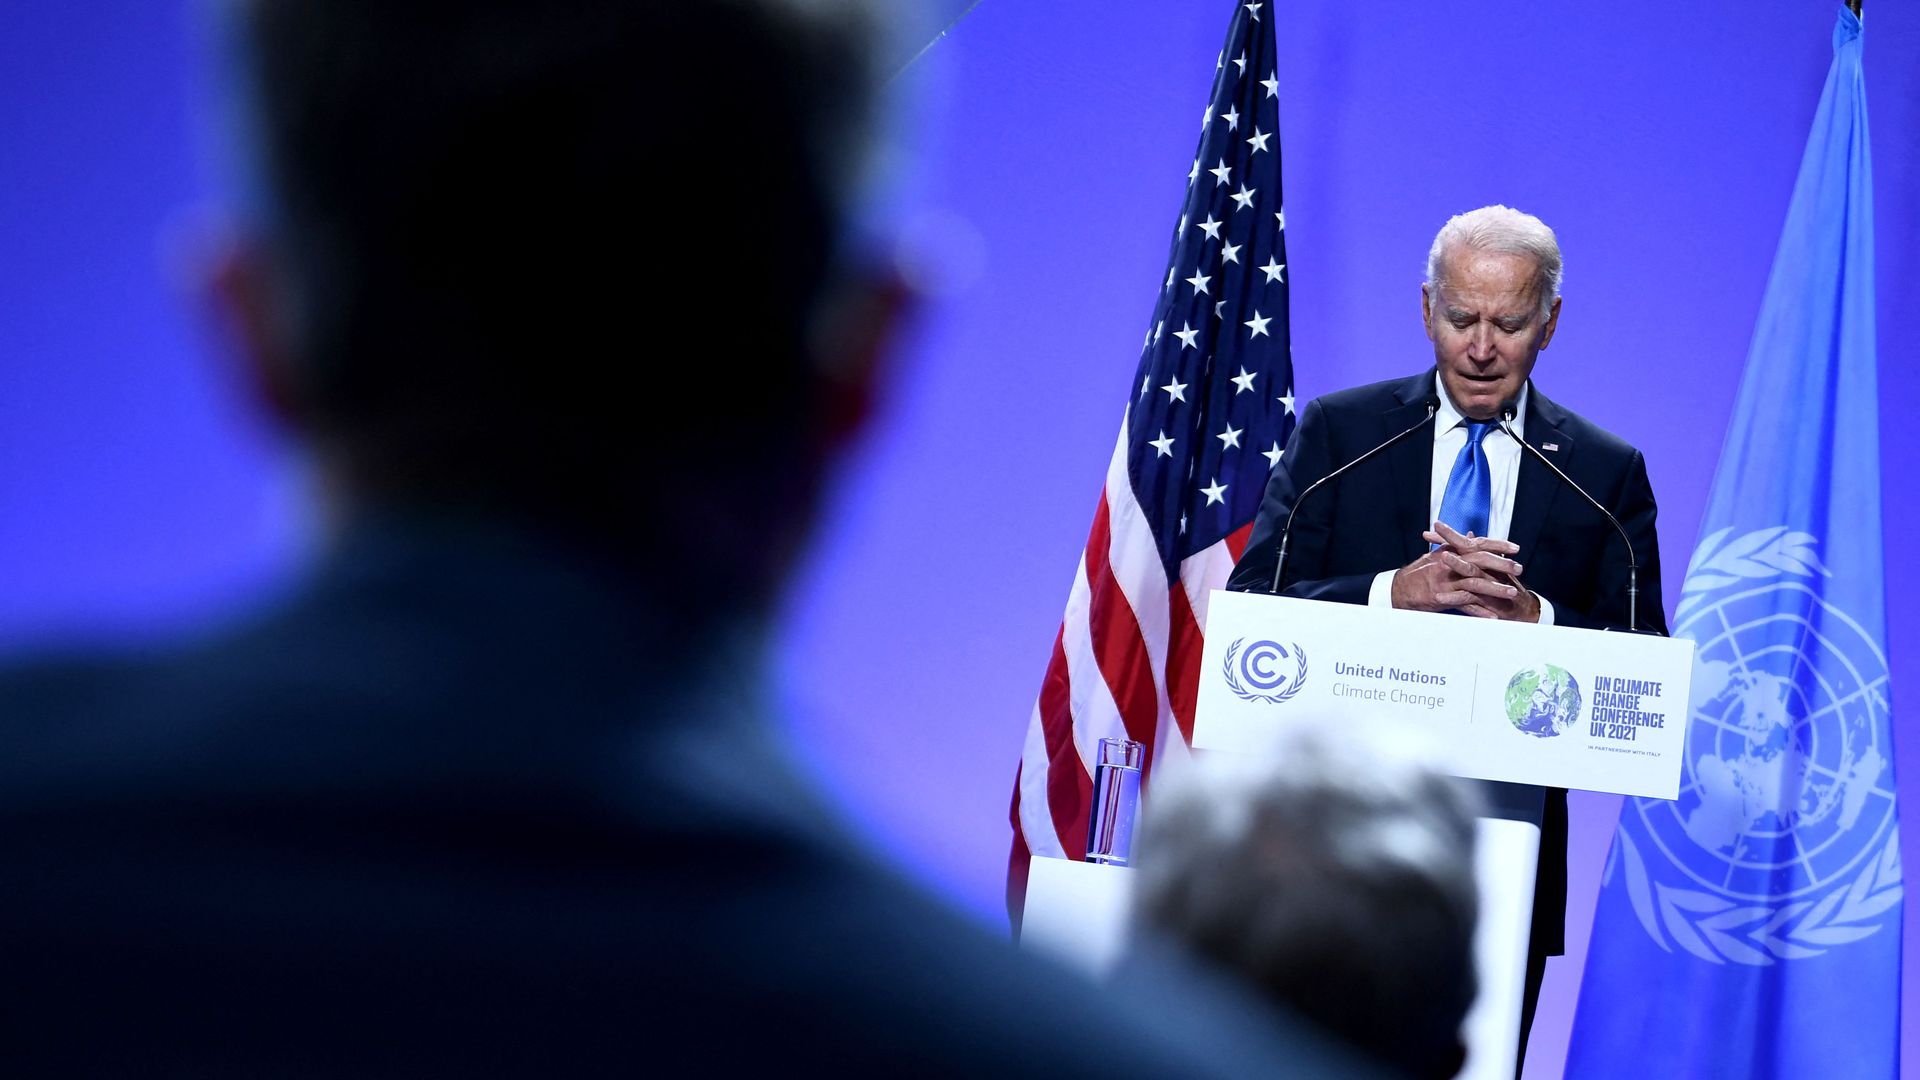 President Biden is seen speaking during a news conference on Tuesday.